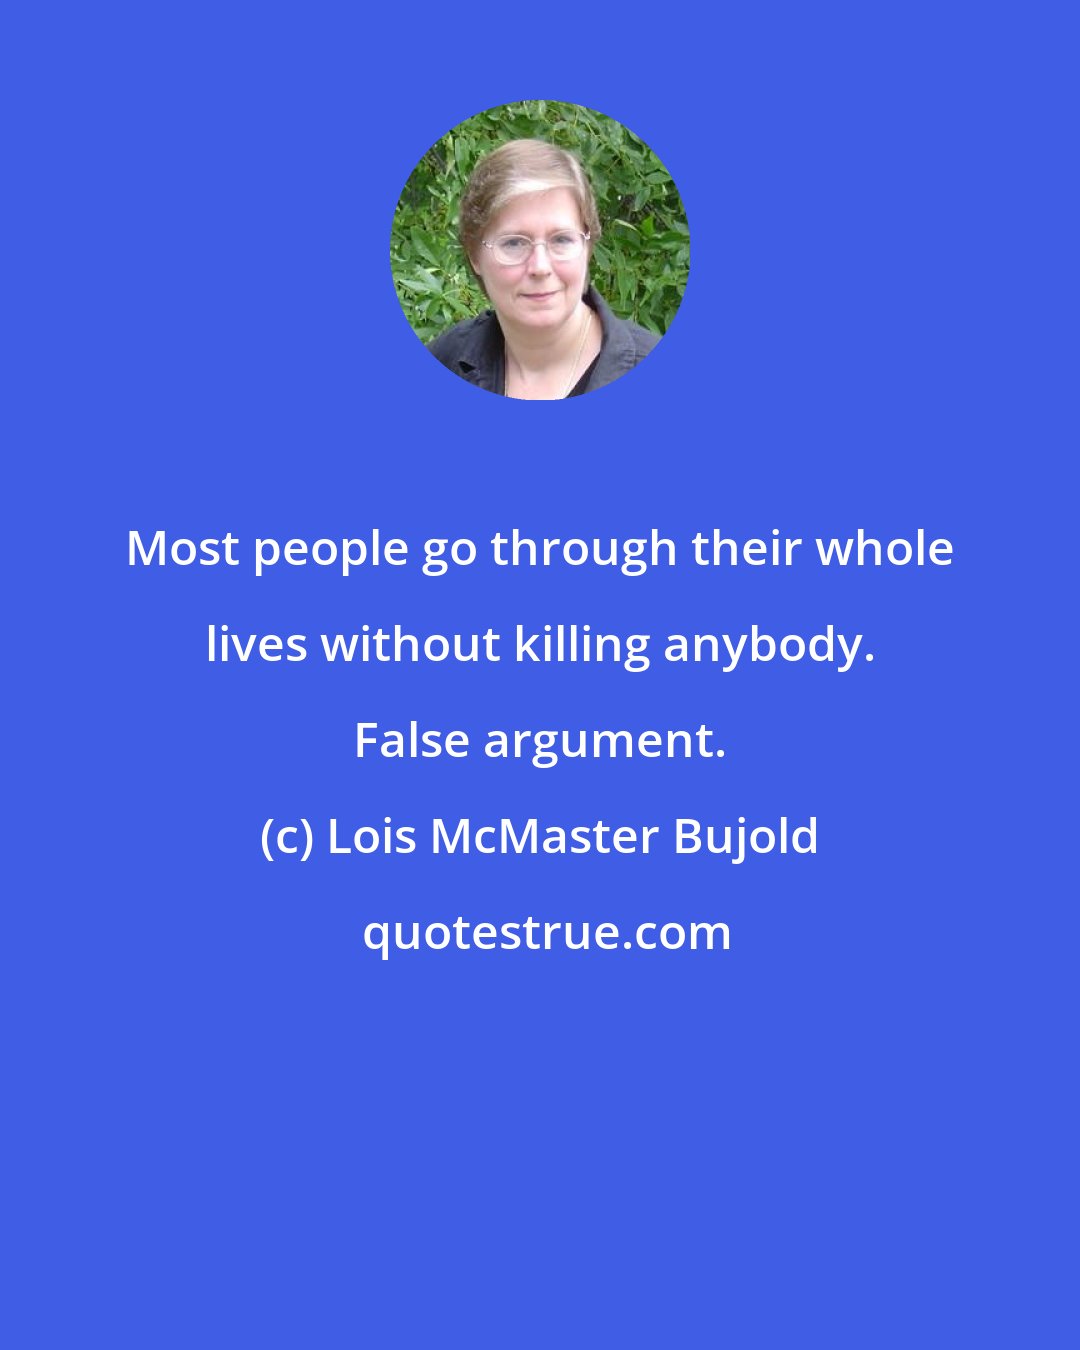 Lois McMaster Bujold: Most people go through their whole lives without killing anybody. False argument.